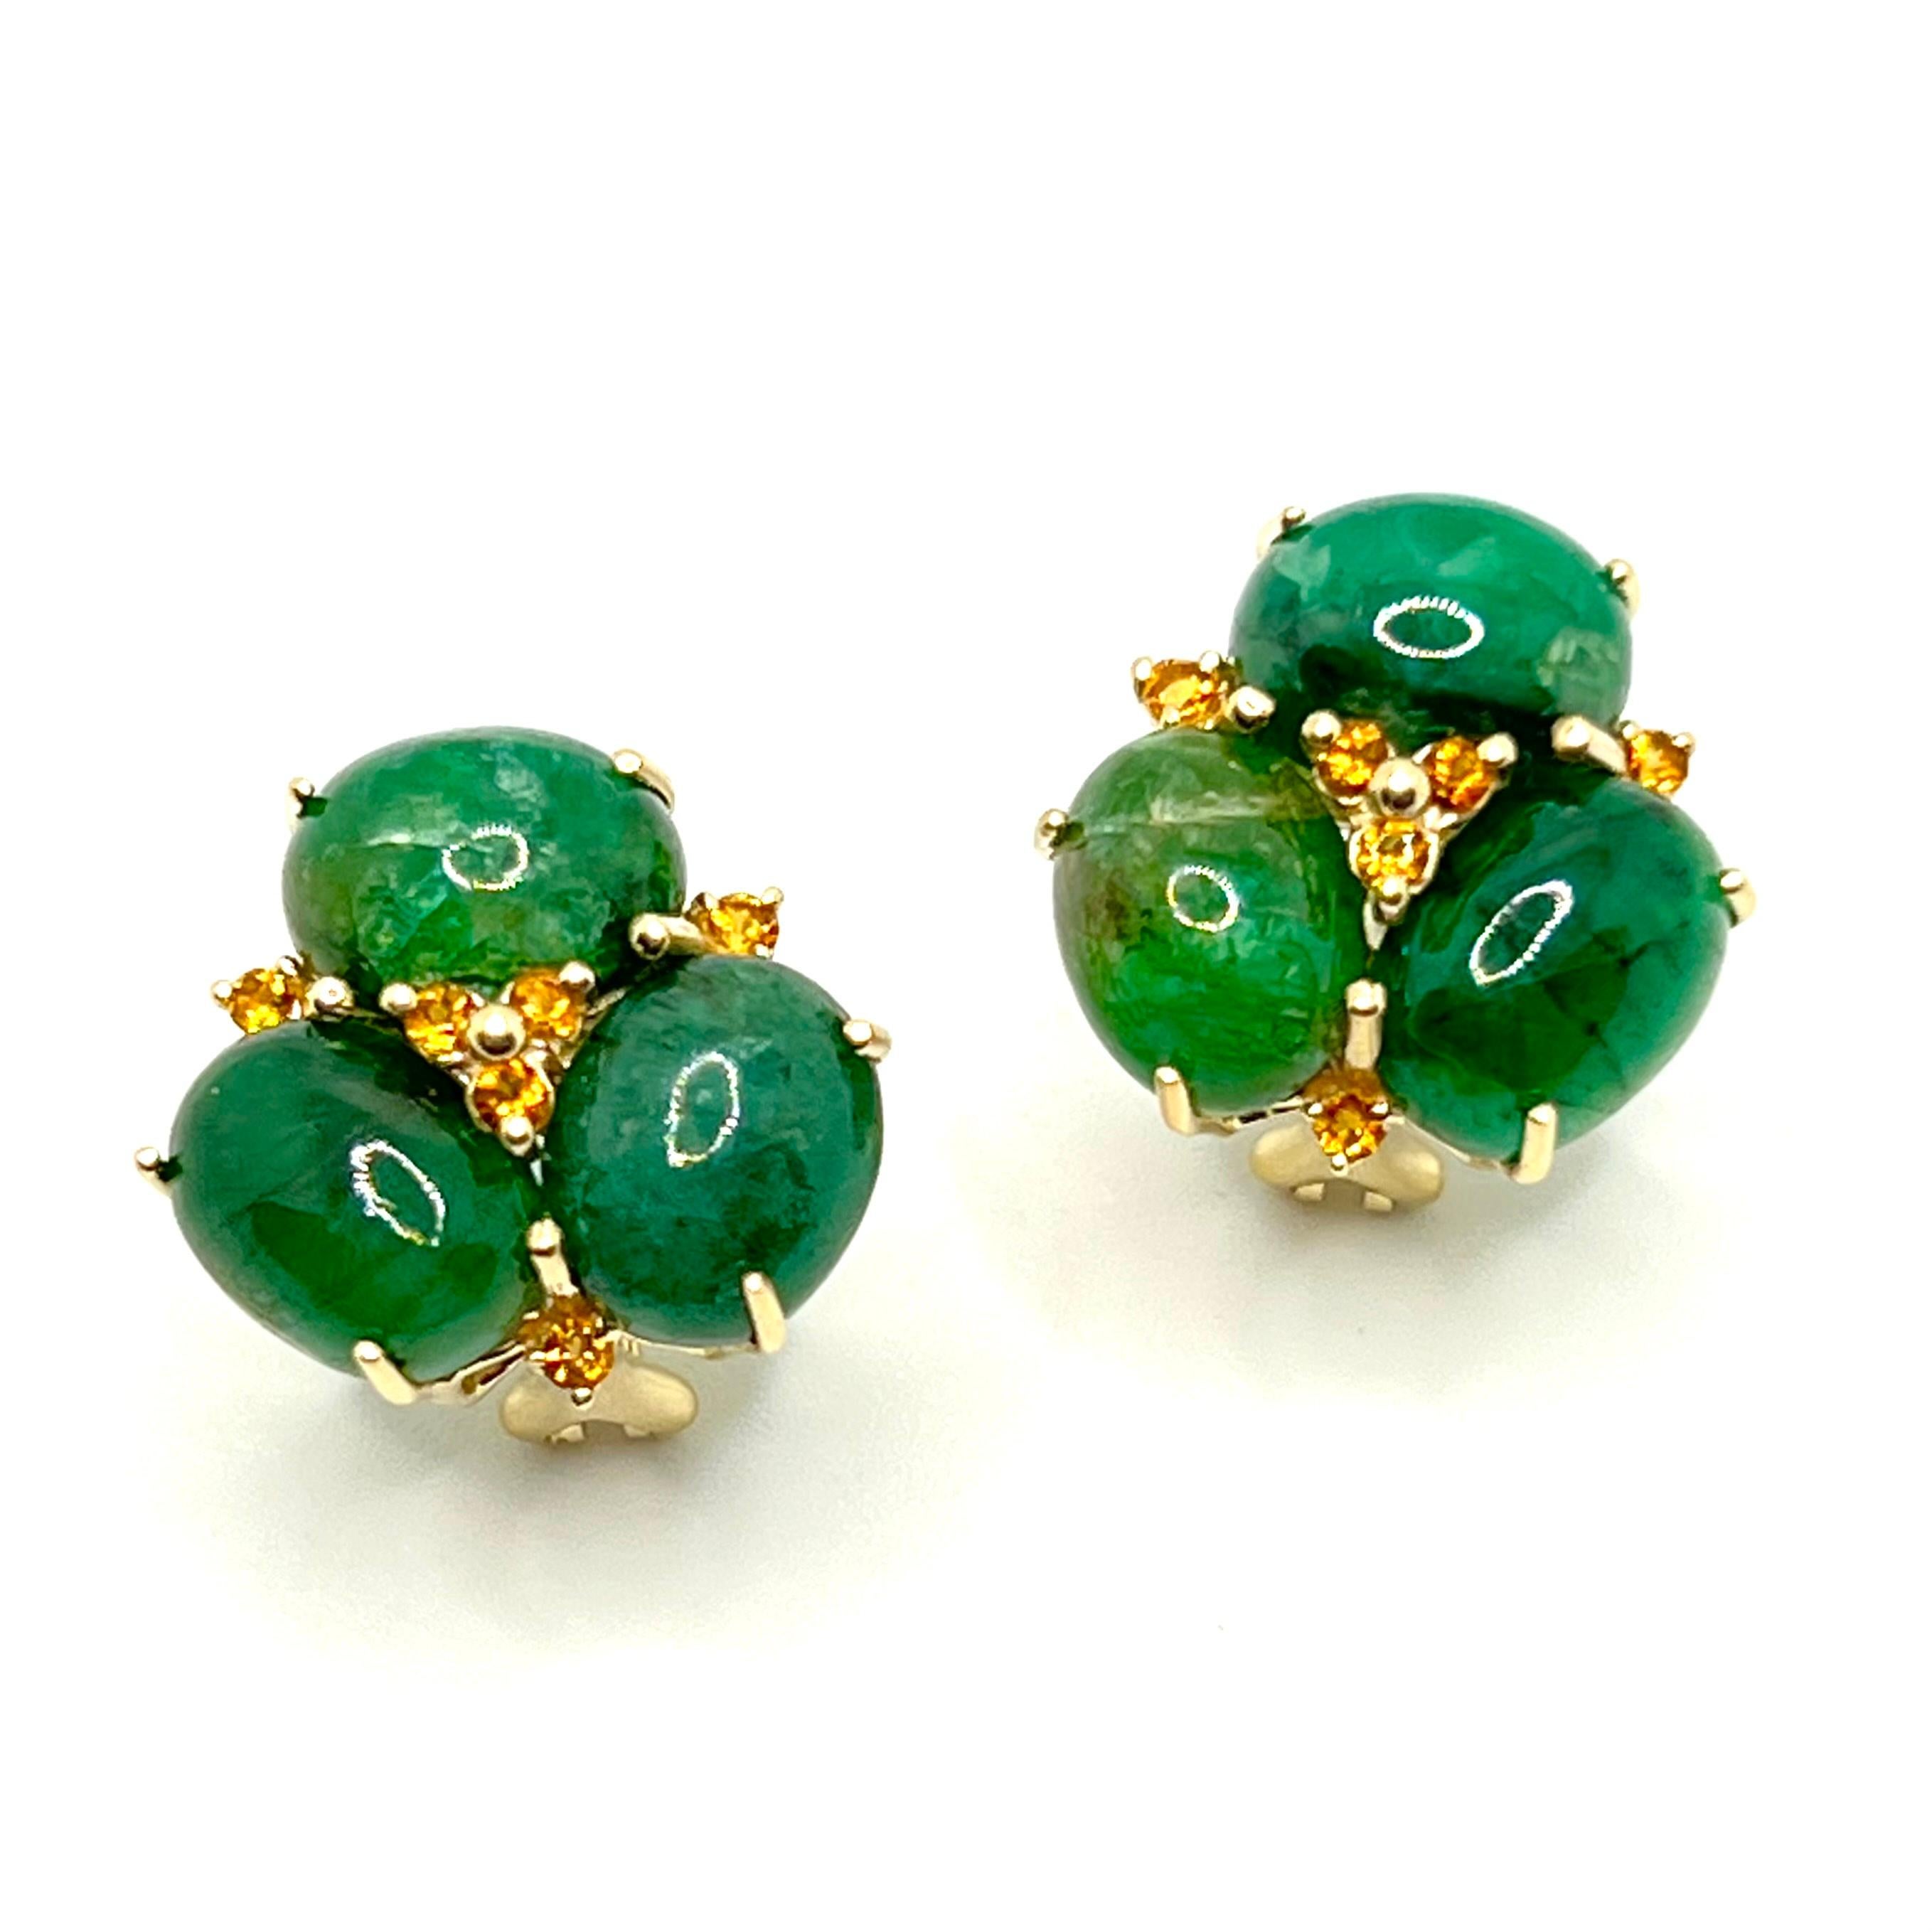 These stunning pair of earrings feature sets of oval cabochon-cut African green emerald adorned with round Brazilian citrine, handset in 14k yellow gold. The oval emerald stones have rich green hue and produce beautiful shiny reflection. Straight